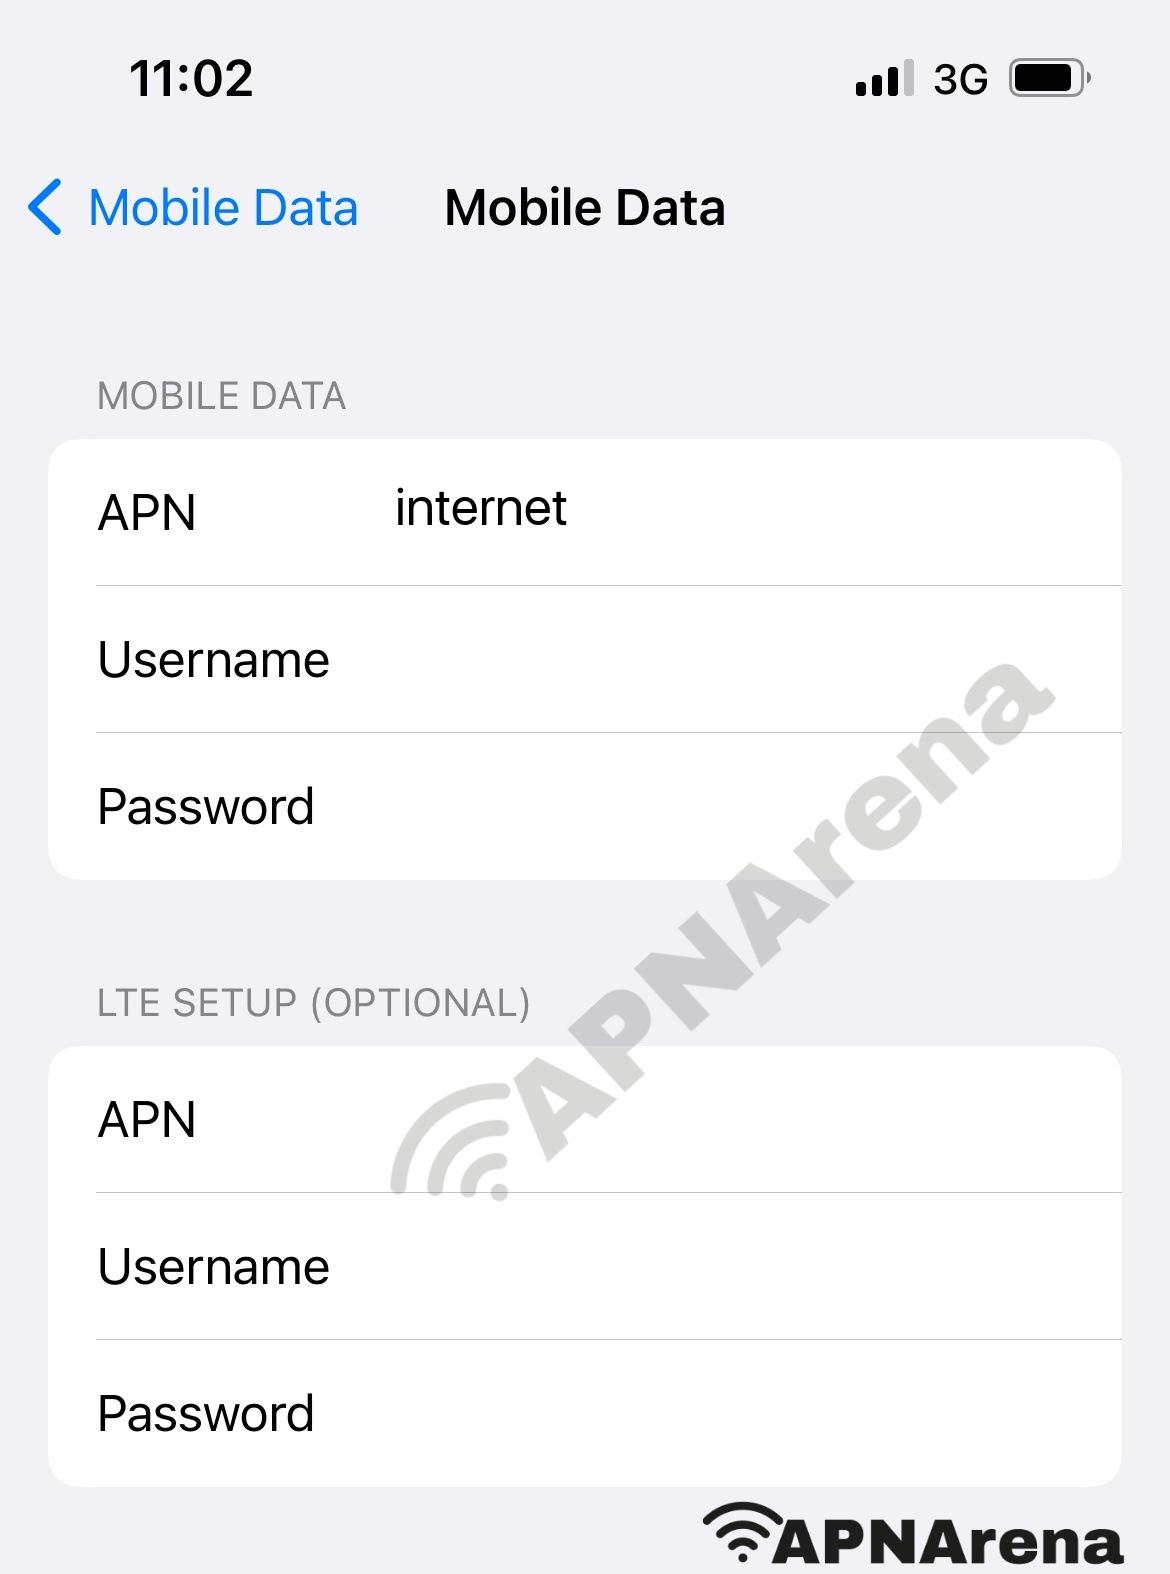 Boost Mobile APN Settings for iPhone